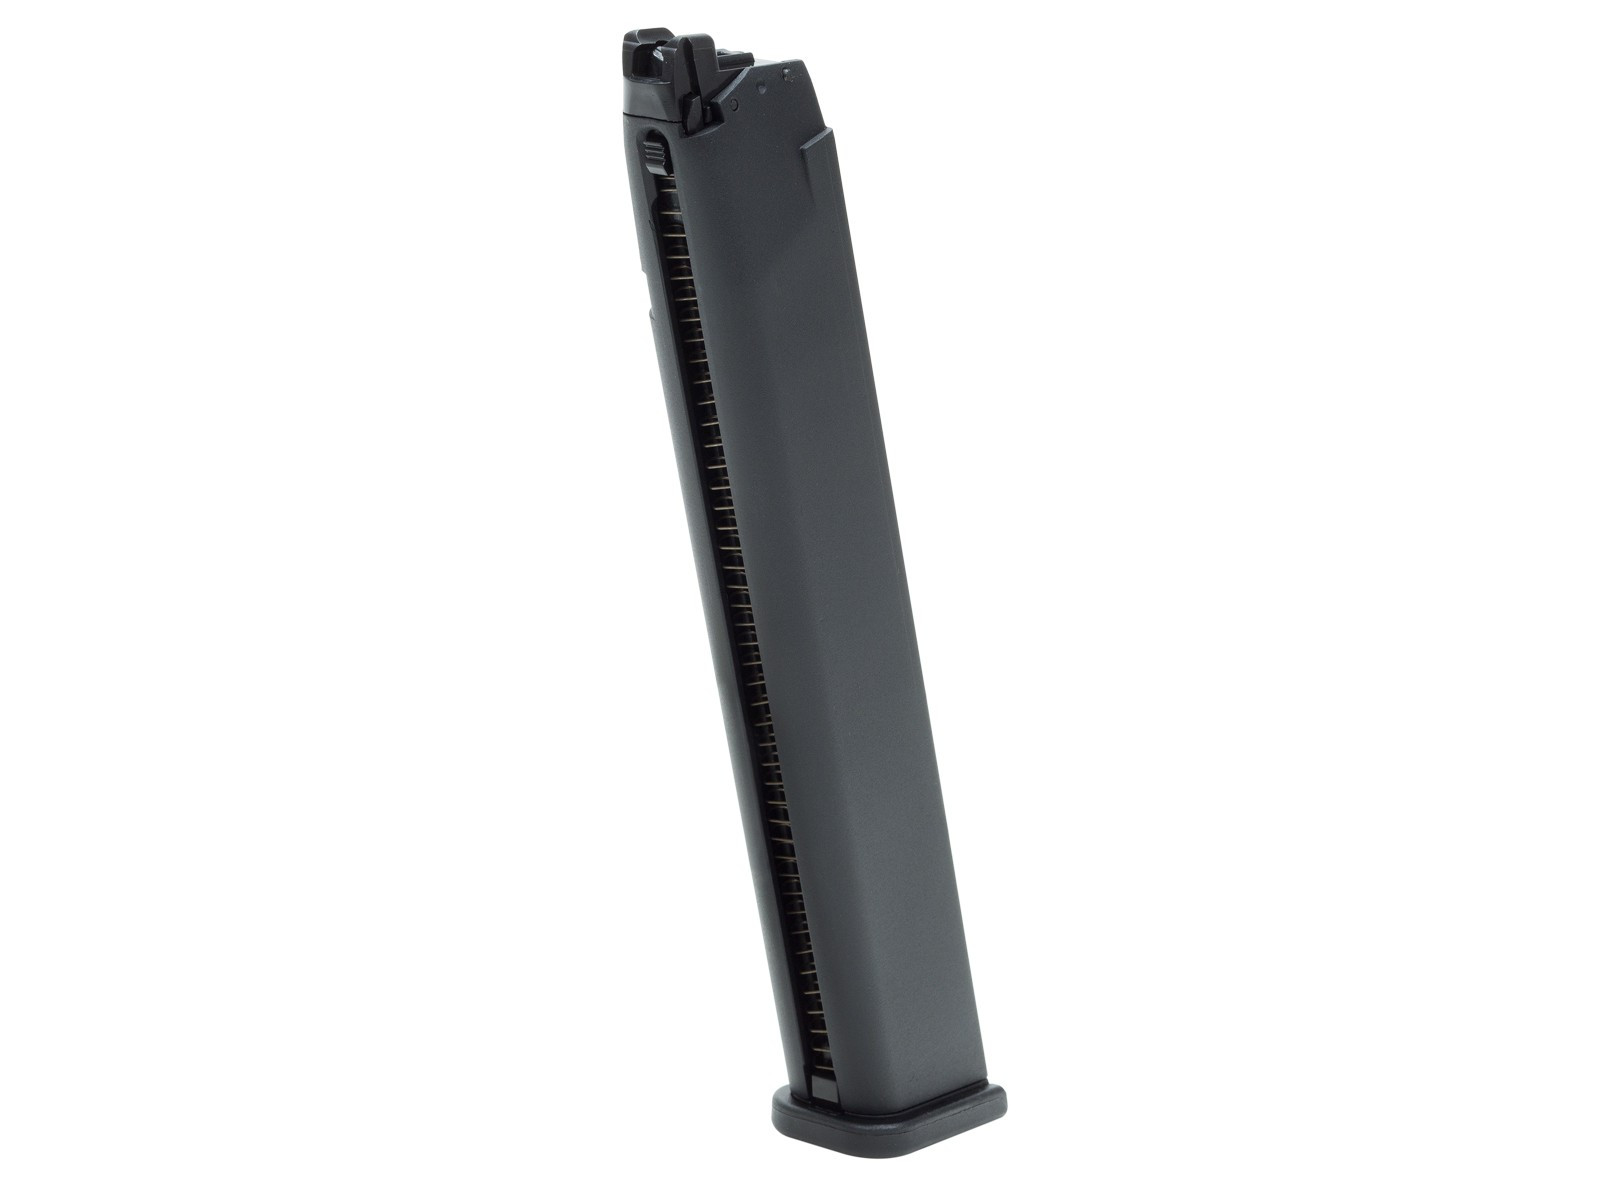 Glock 18C Gen3 GBB Airsoft Extended Magazine, 50rd